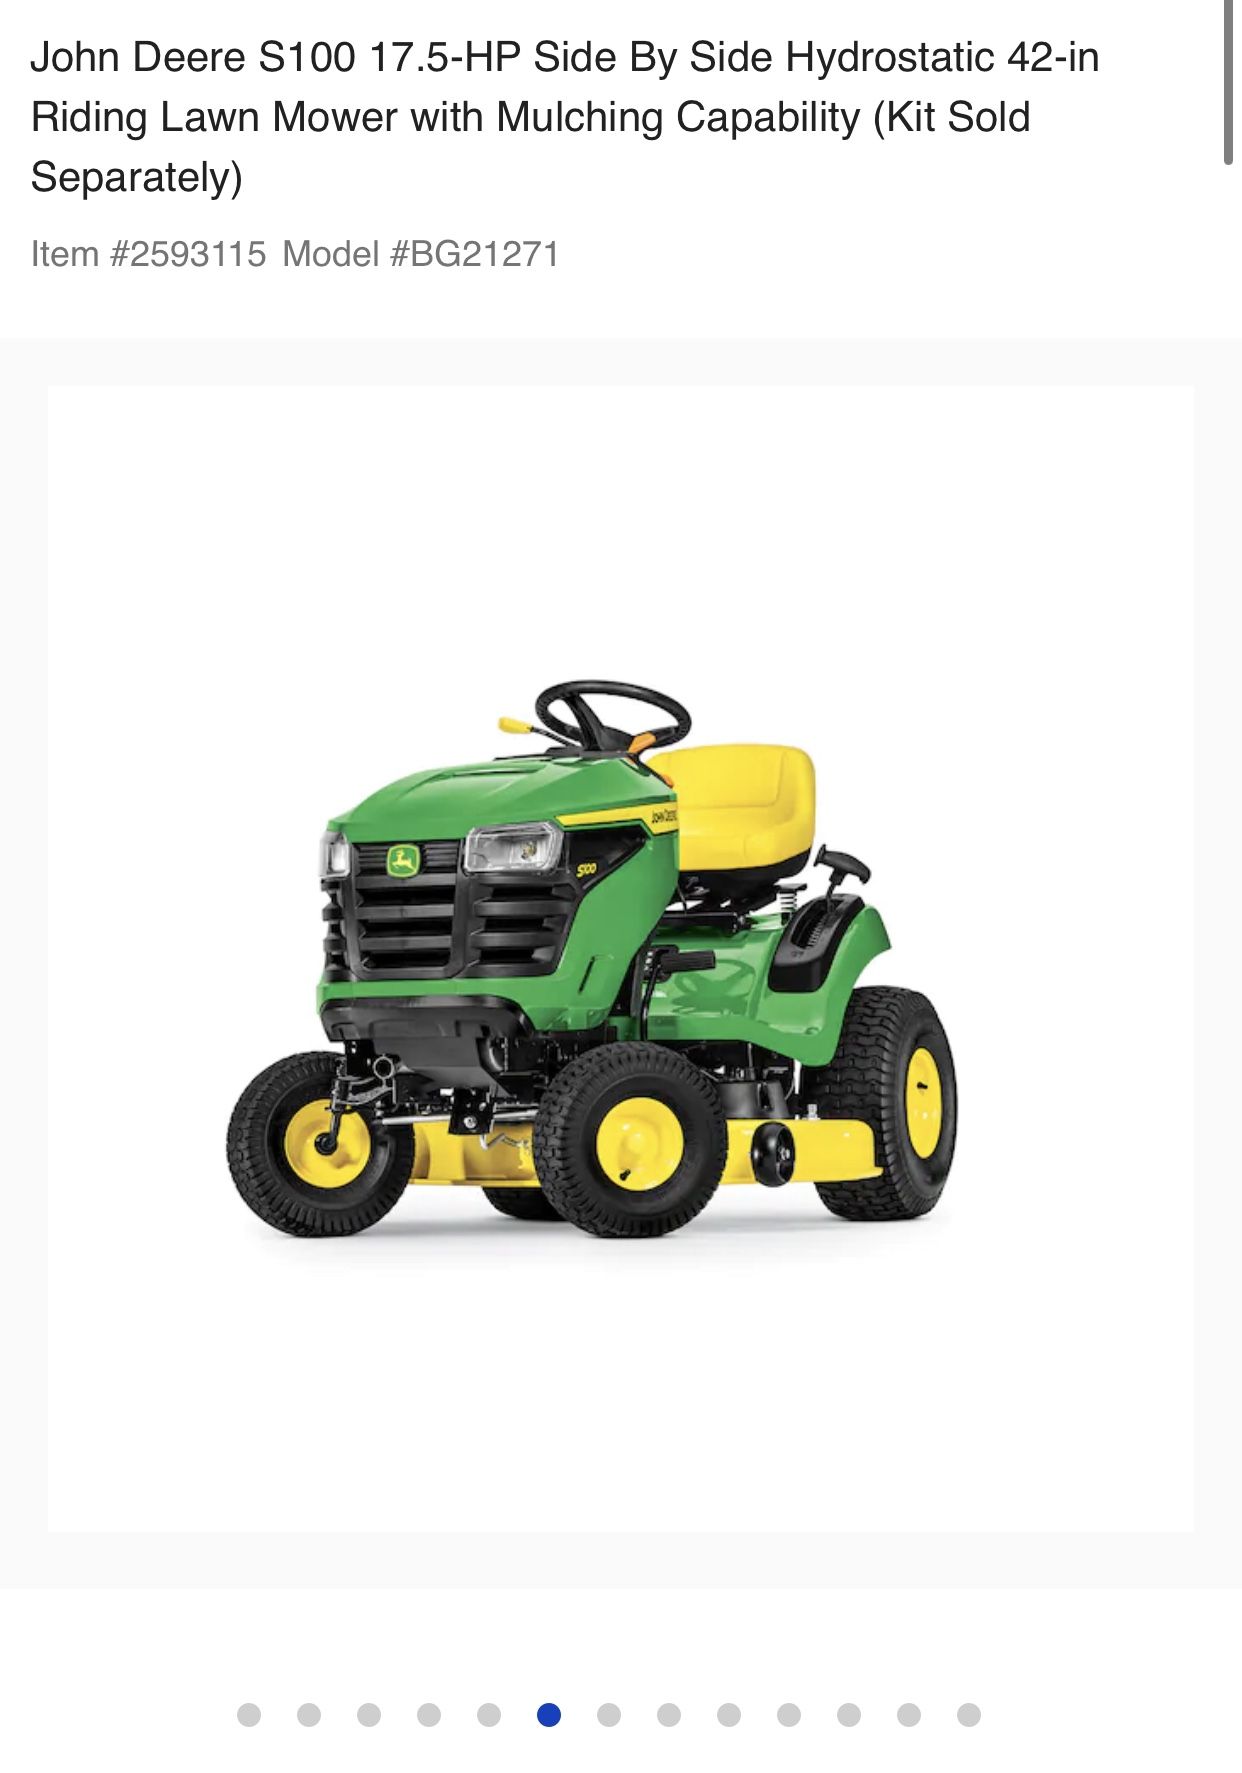 BRAND NEW John Deere S100 17.5-HP Side By Side Hydrostatic 42-in Riding Lawn Mower with Mulching Capability